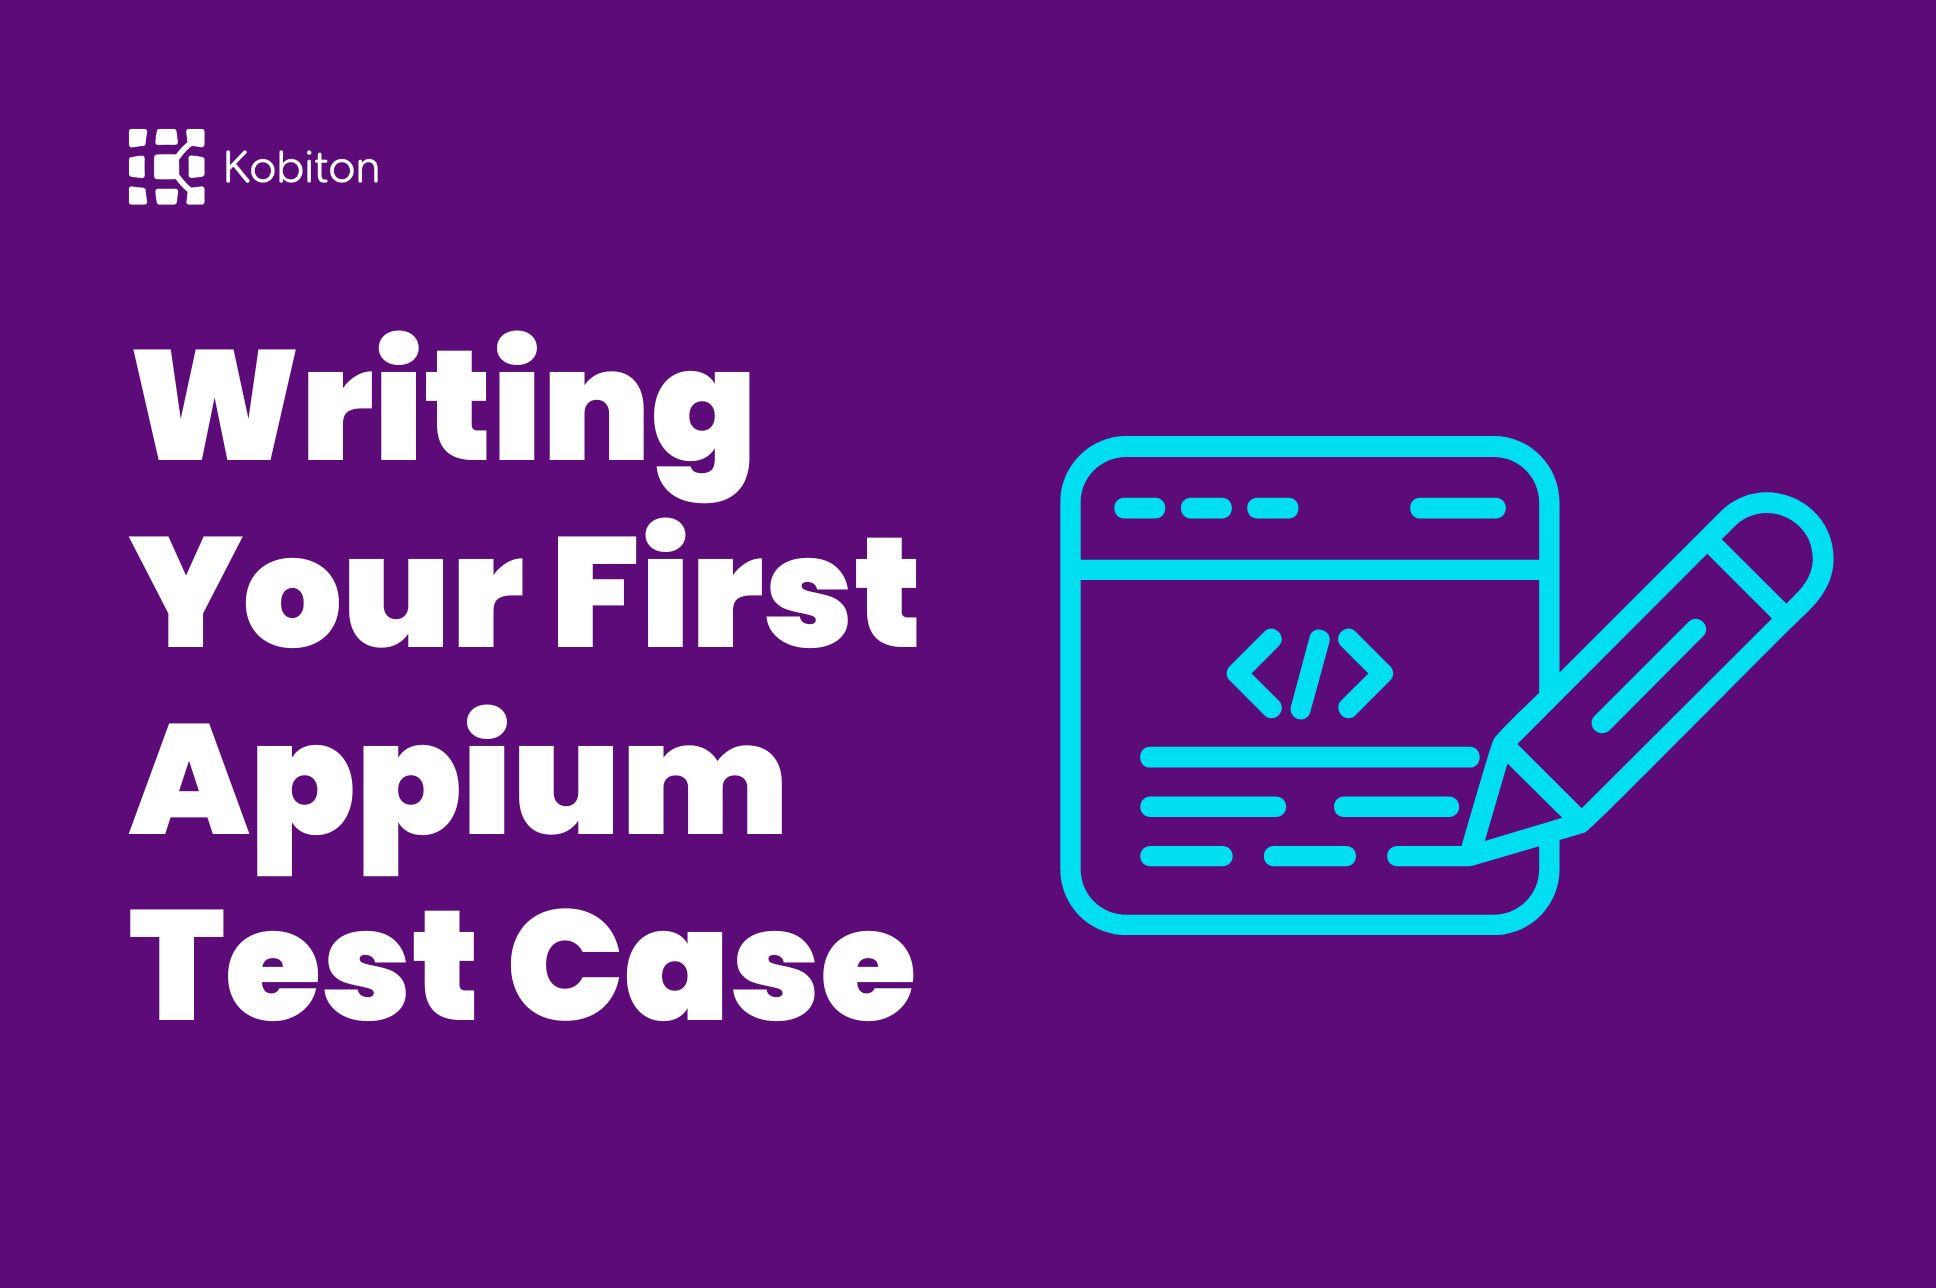 Writing your first Appium test case